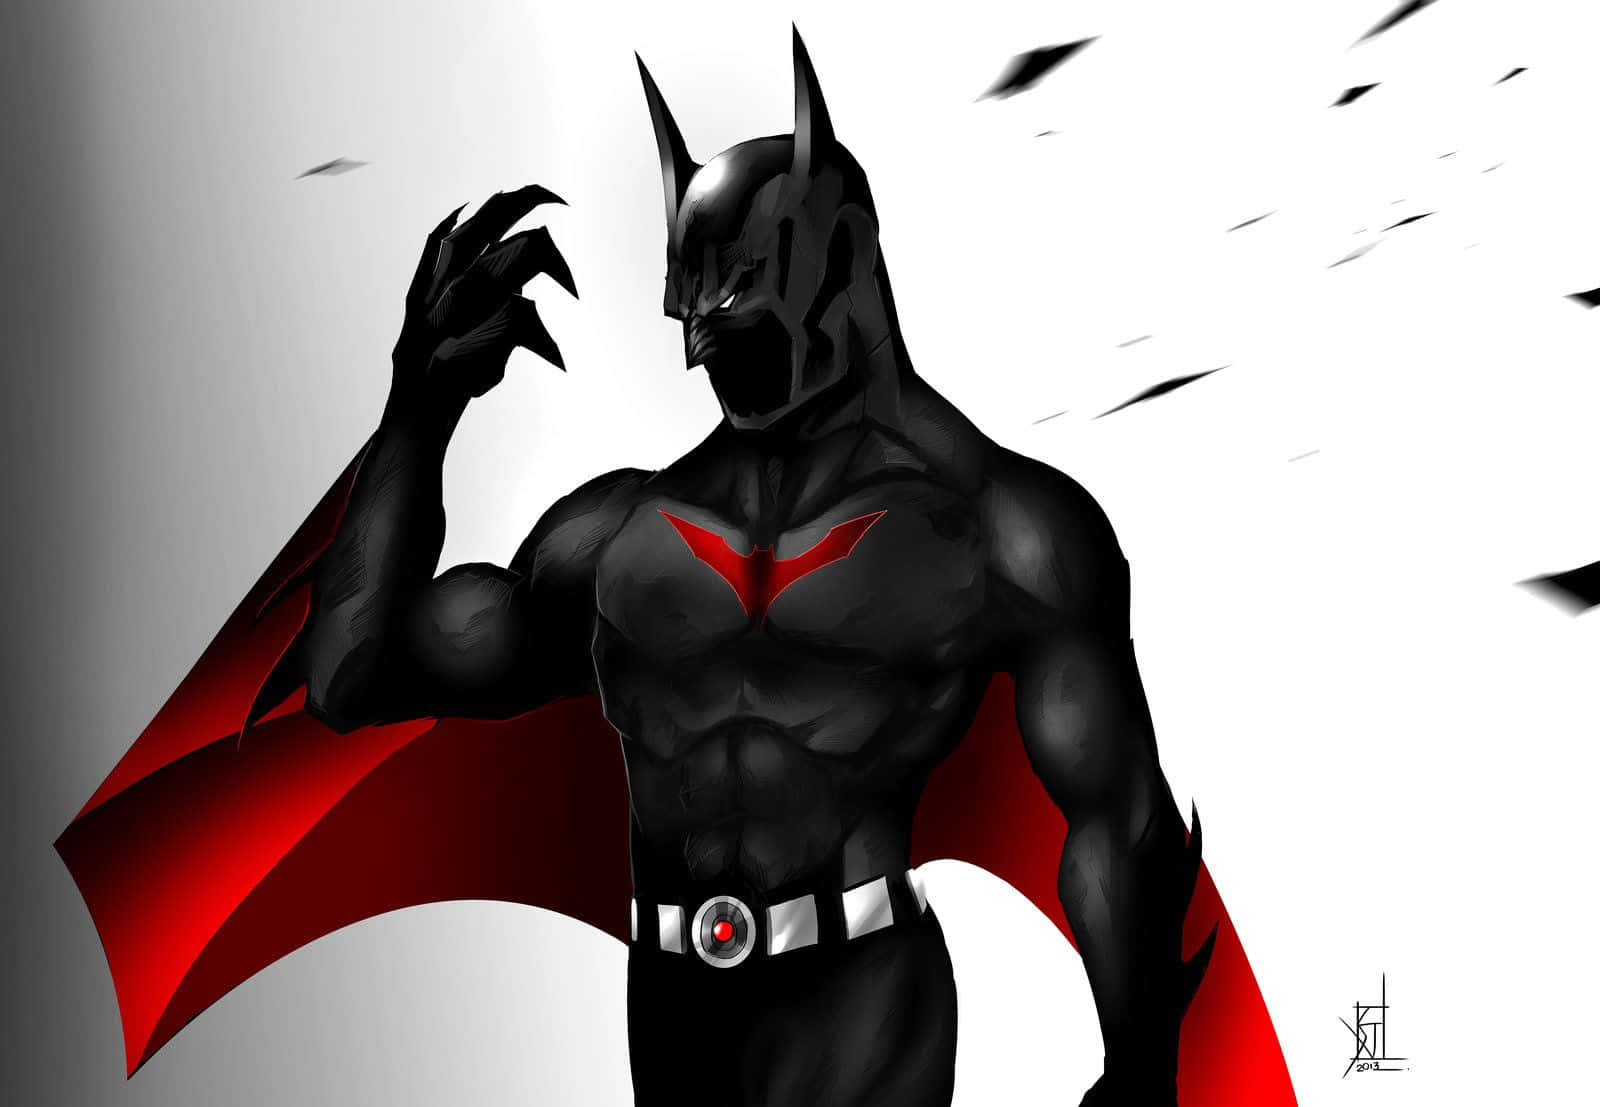 "The Future of Justice: Batman Beyond"